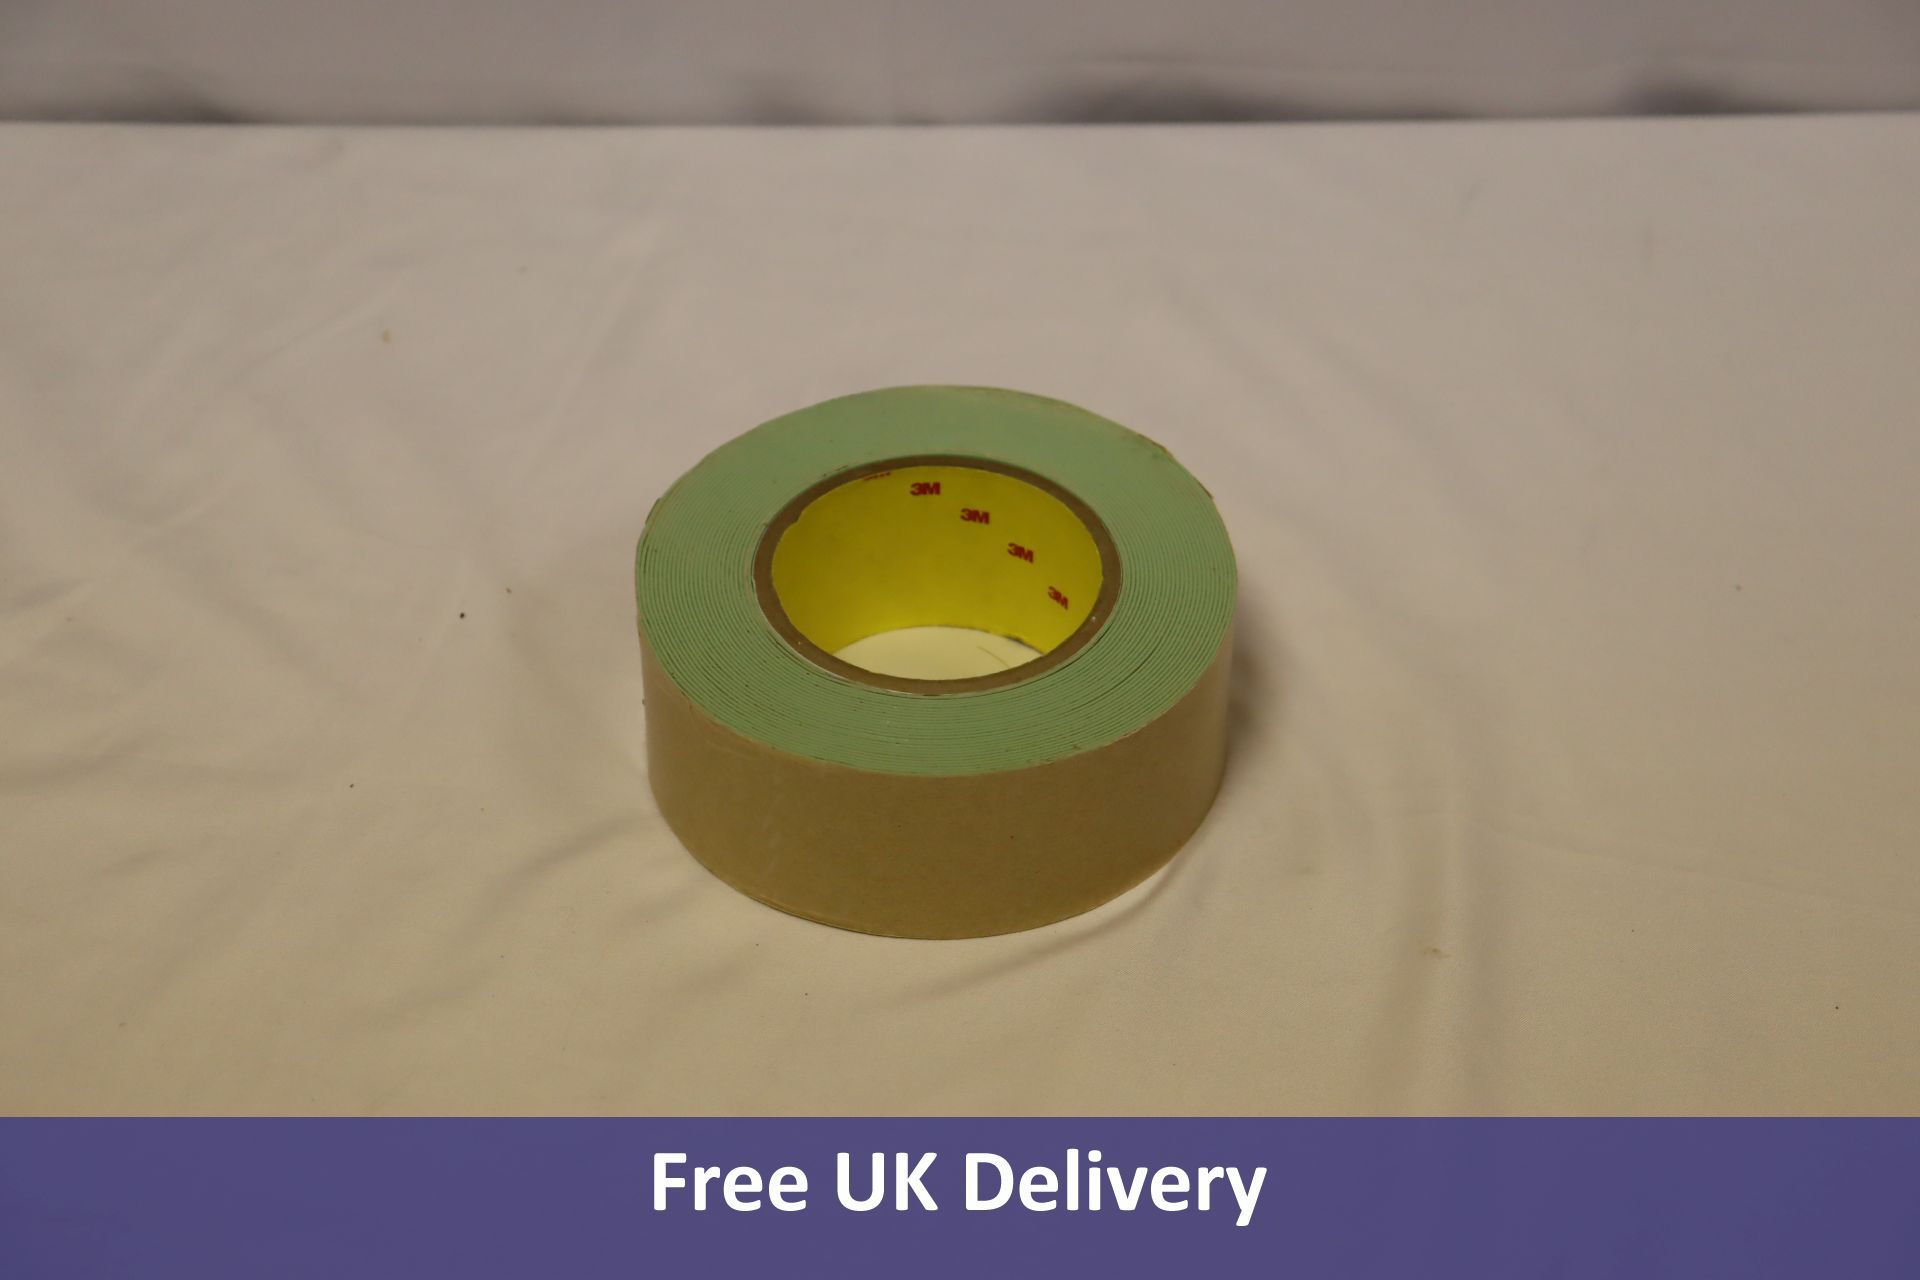 Four 3M Scotch 500 Series Acrylic Adhesive Masking Tapes, Green, 50.80mm x 9.1m